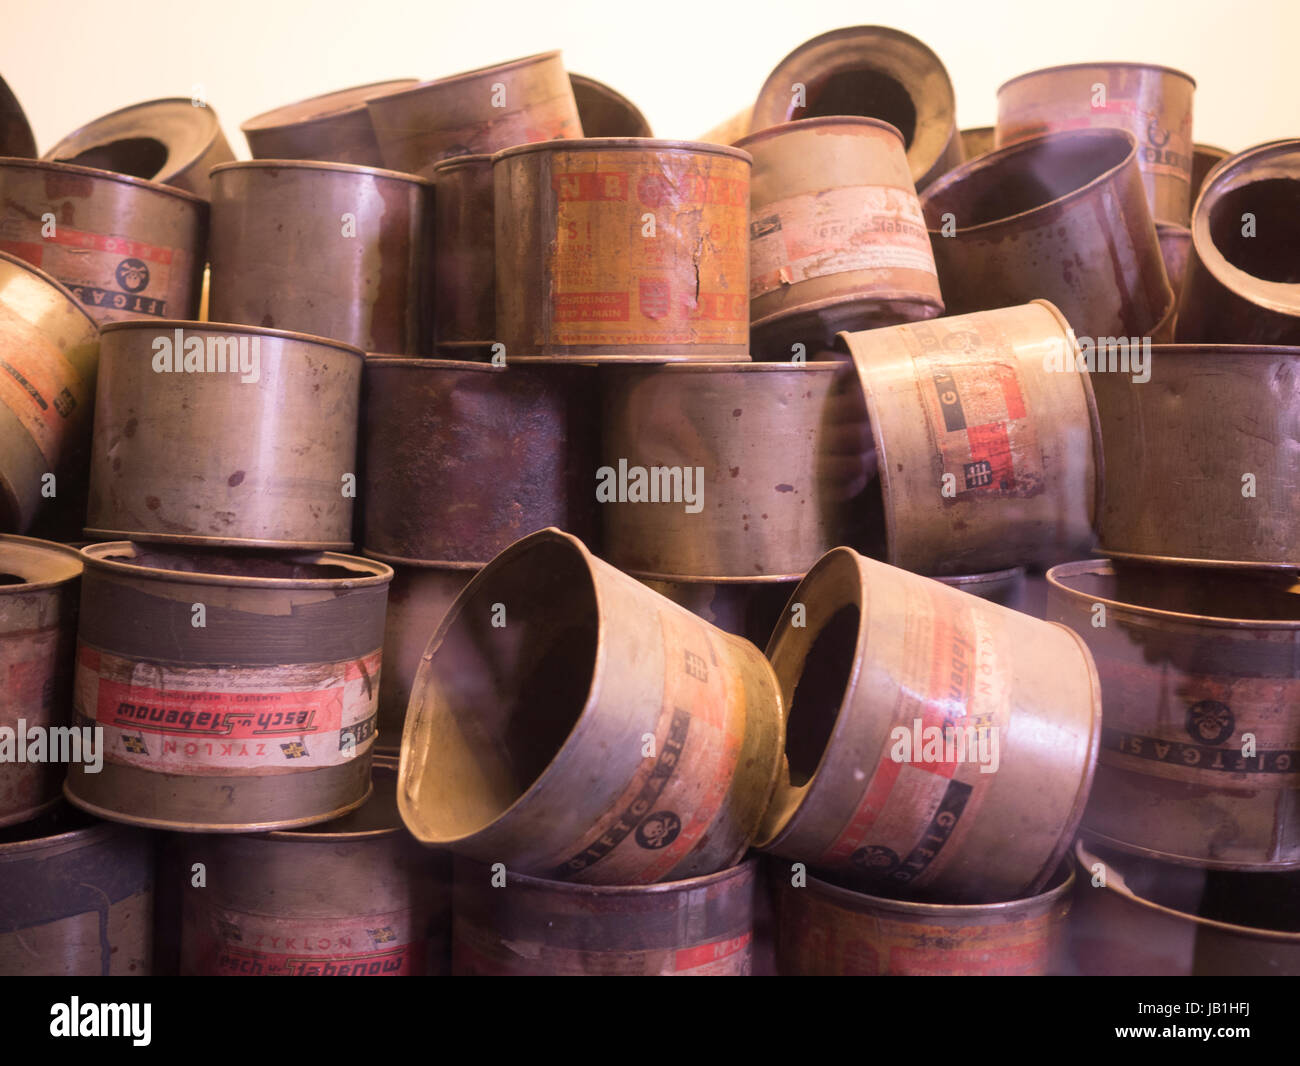 Canisters of Zyklon B used by the Nazis to kill millions of Jews. Stock Photo